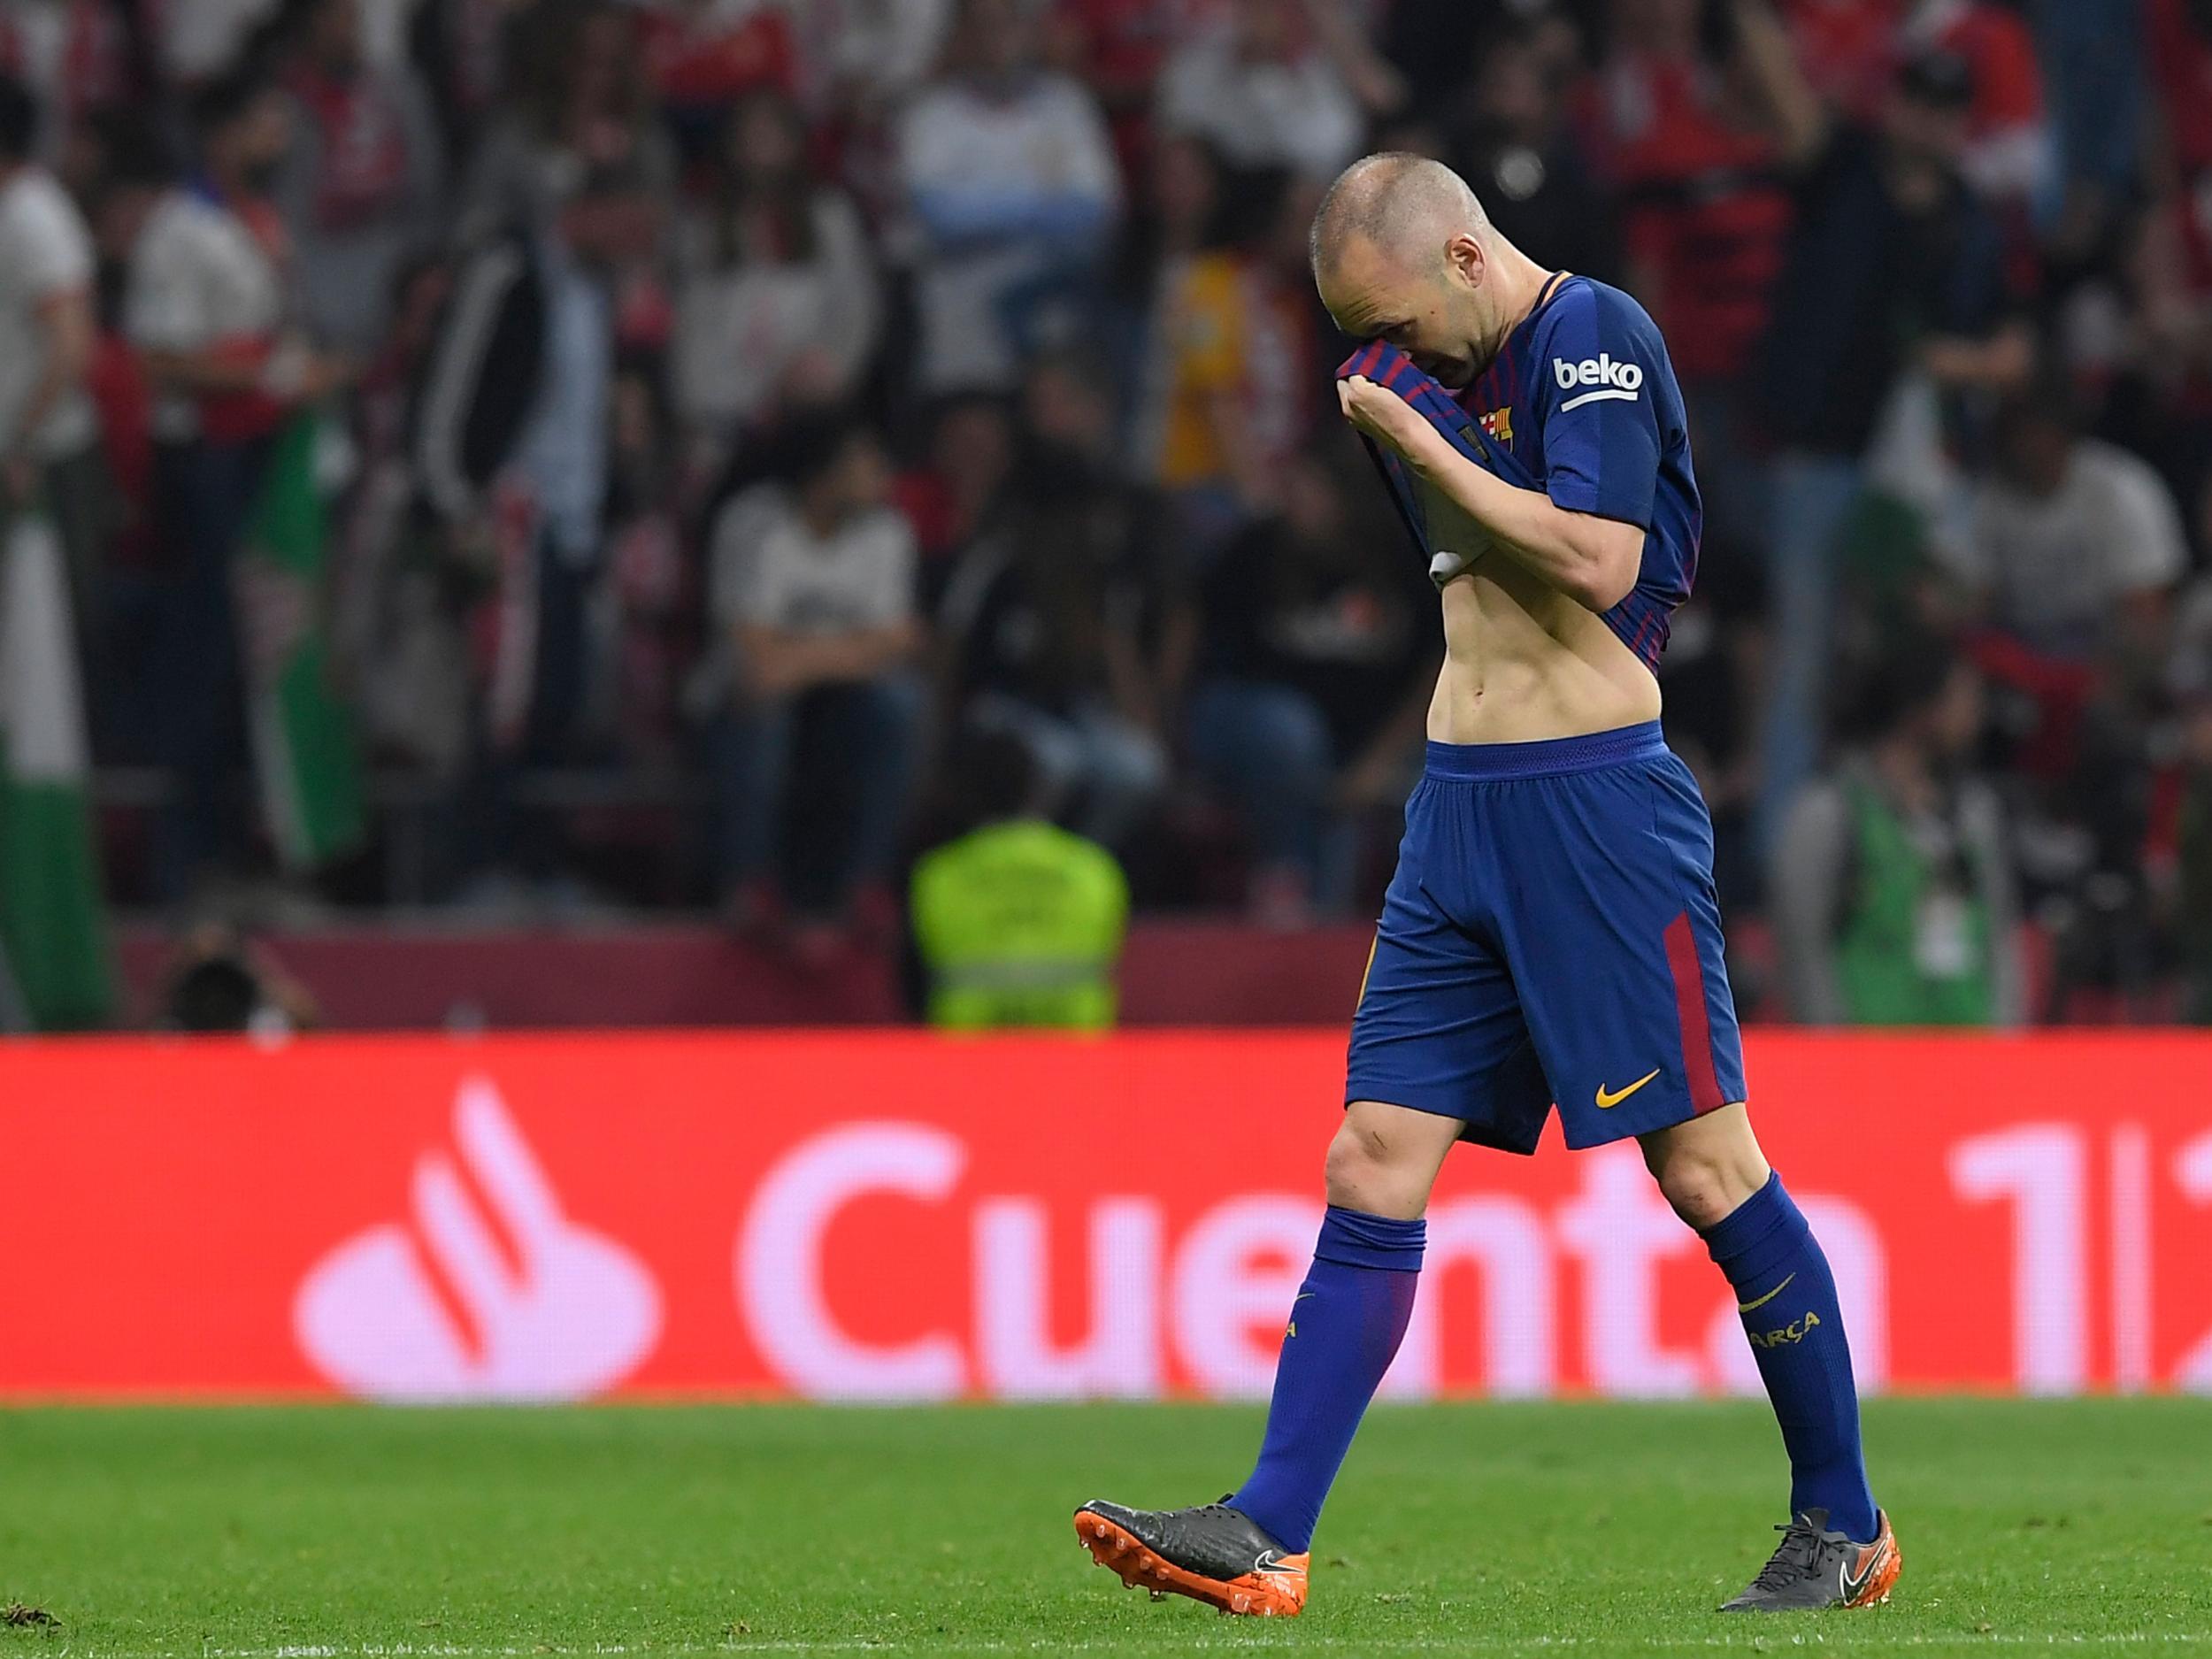 Iniesta was withdrawn shortly before the end to a standing ovation